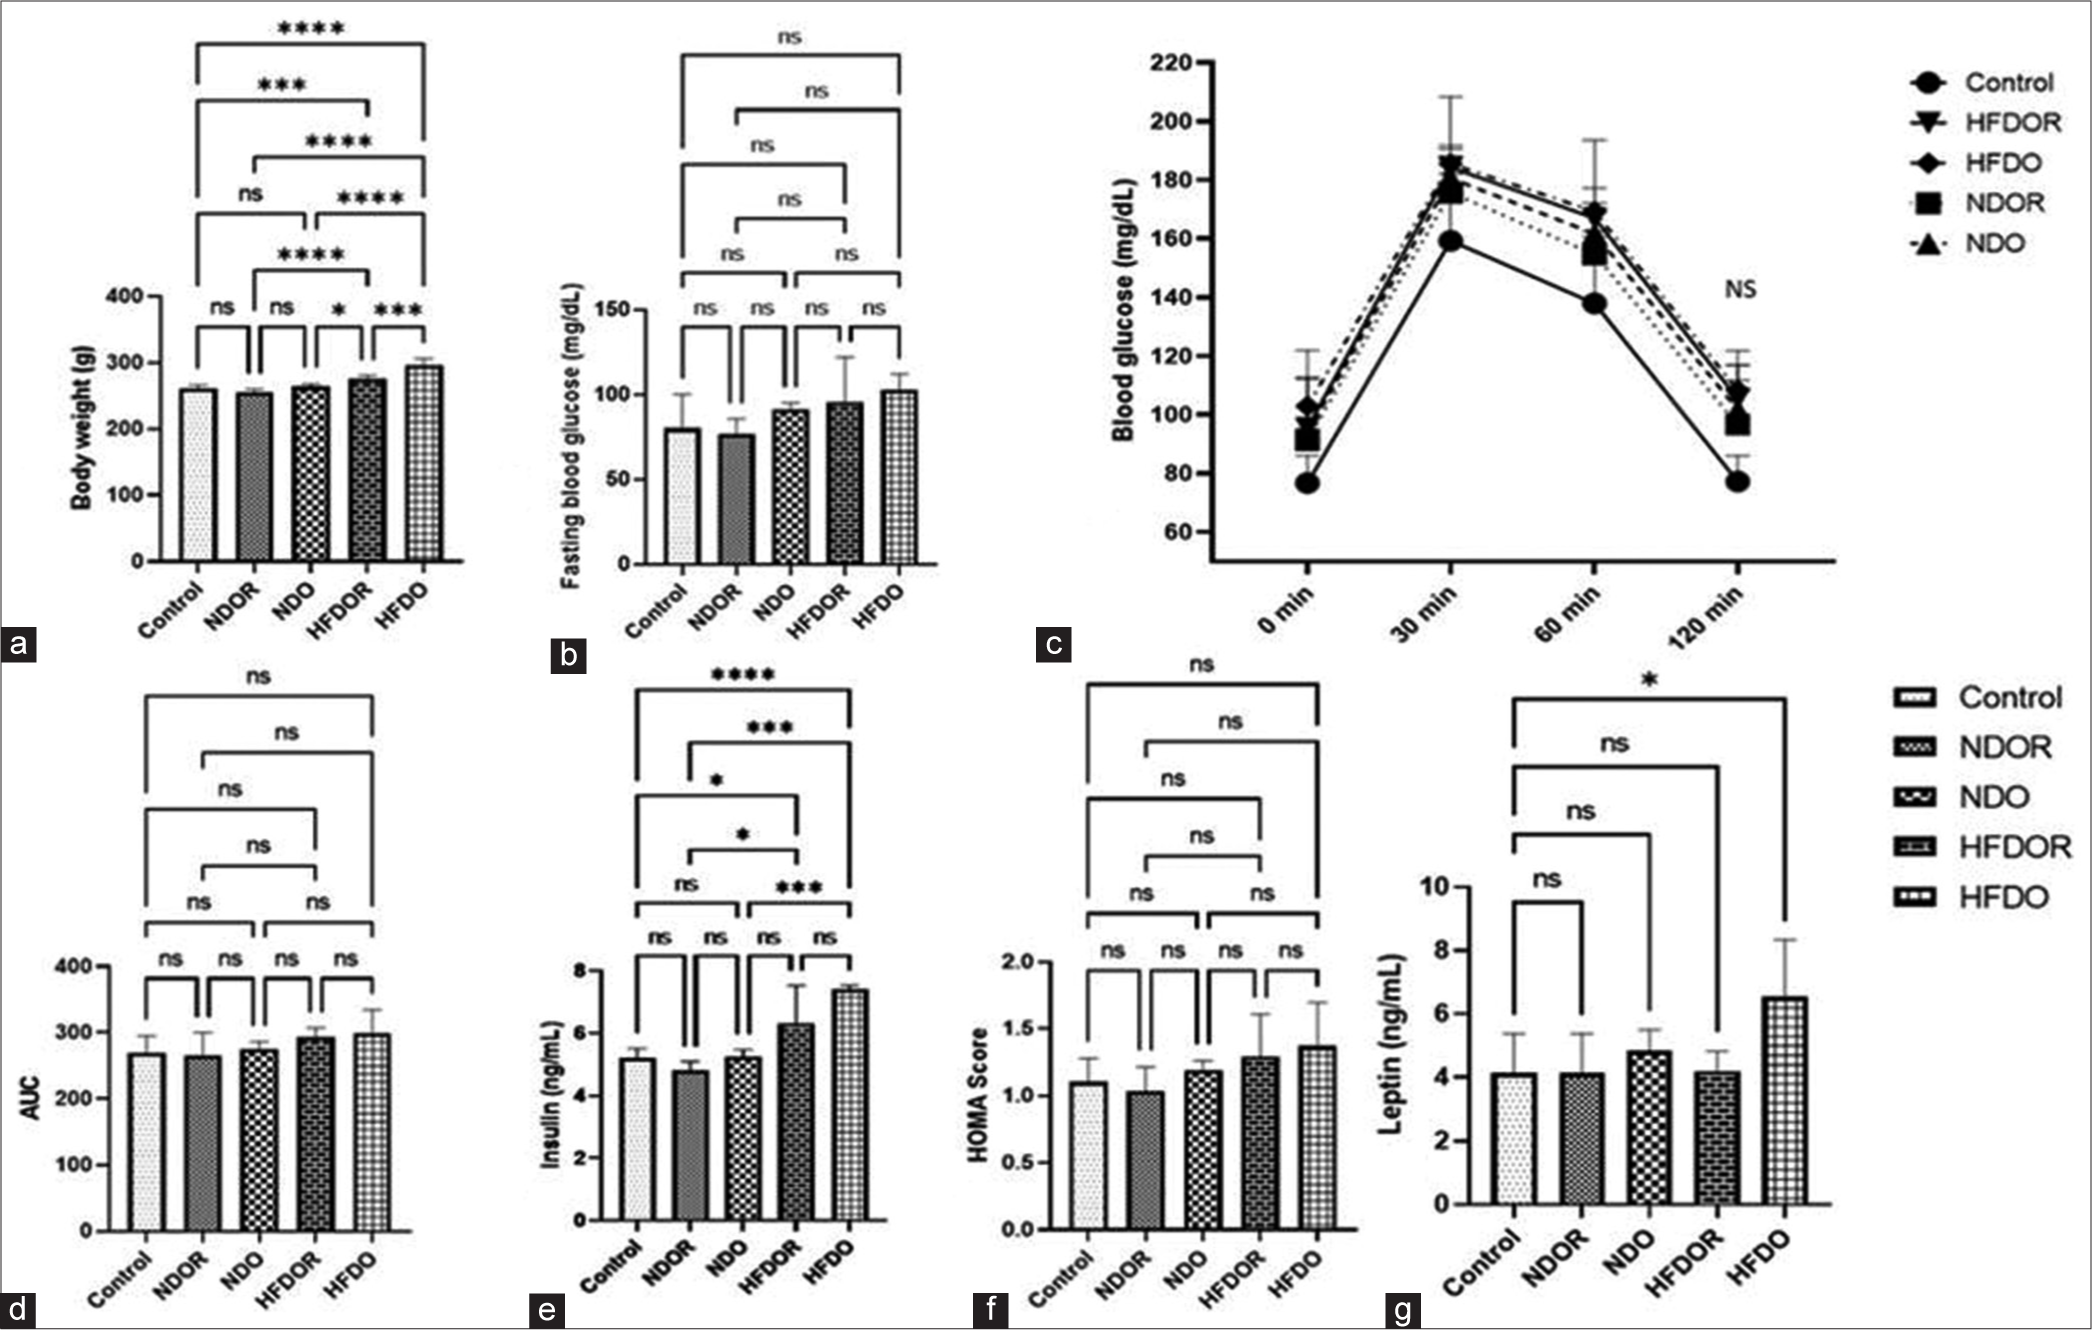 Short-term feeding of high-fat diet induces neuroinflammation and oxidative stress in arcuate nucleus in rats